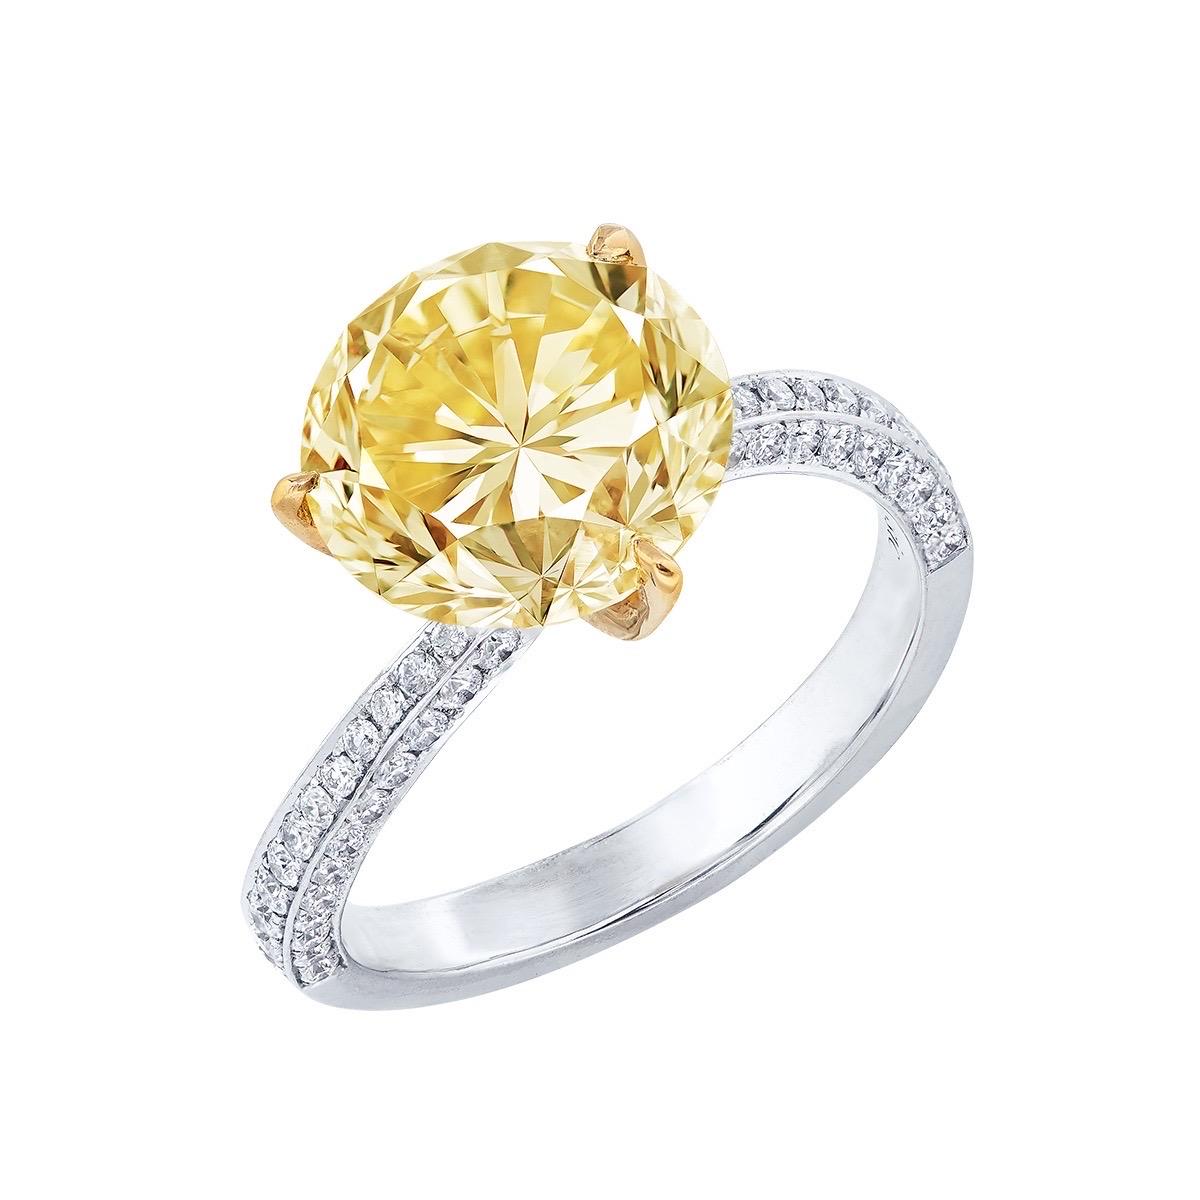 Emilio Jewelry Gia Certified 4.00 Carat Fancy Intense Yellow Diamond Ring In New Condition For Sale In New York, NY